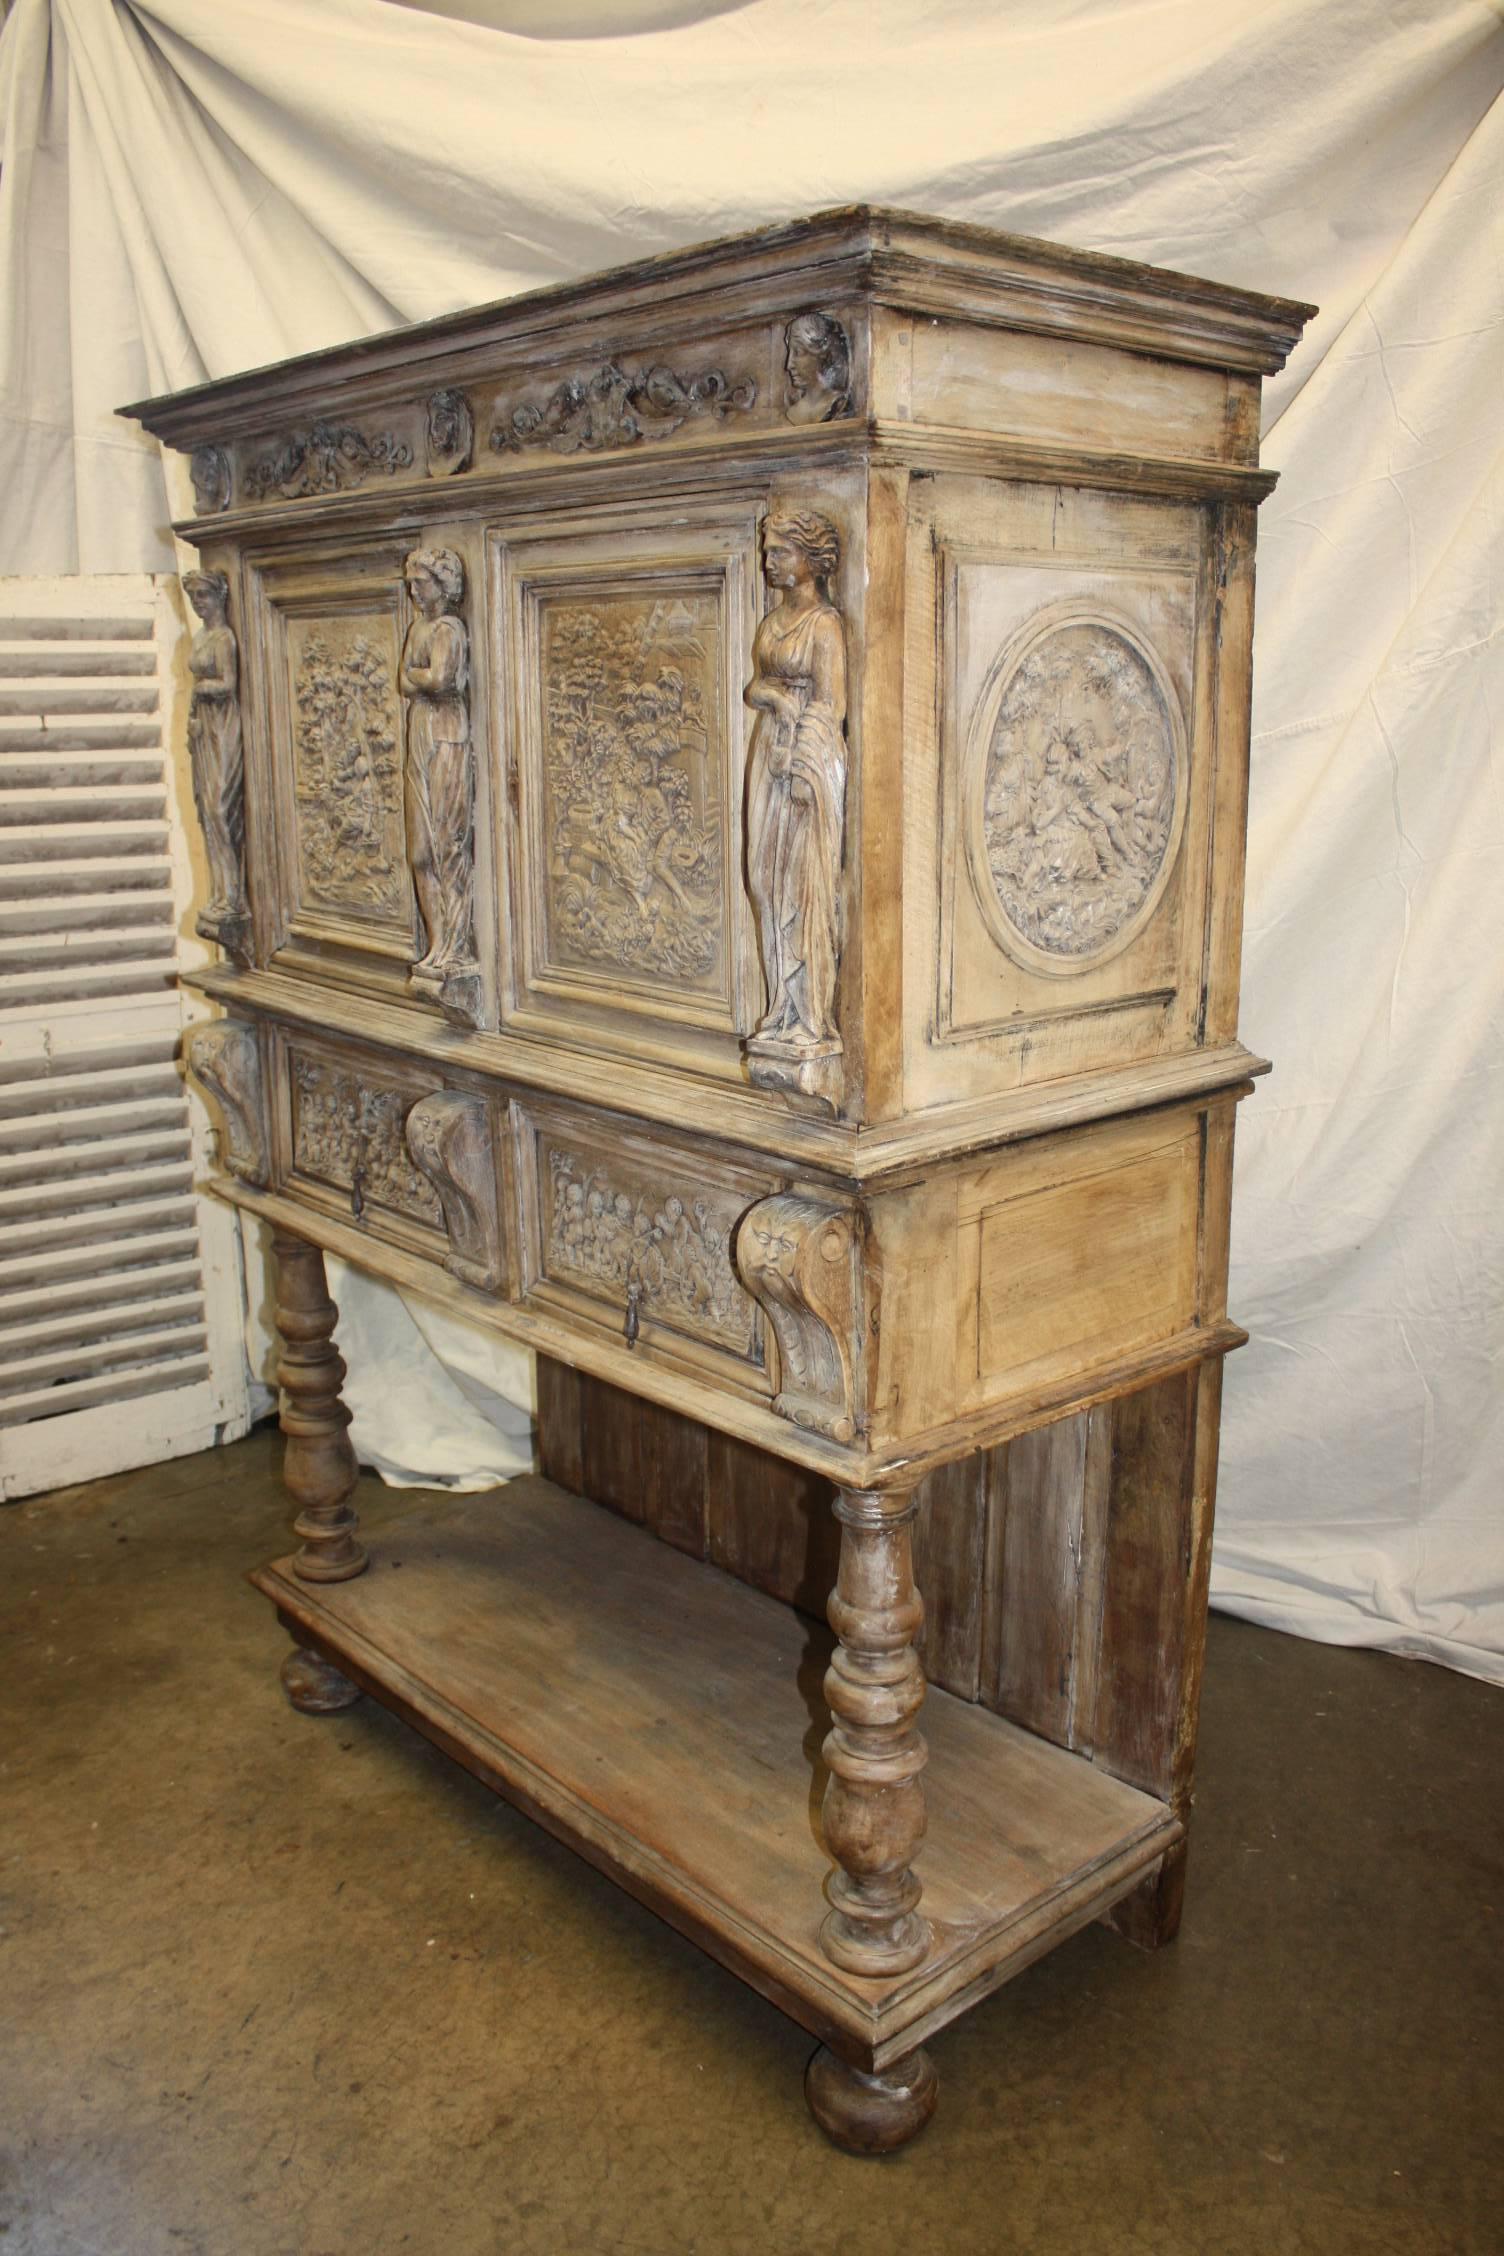 Magnificent 17th century French cabinet.